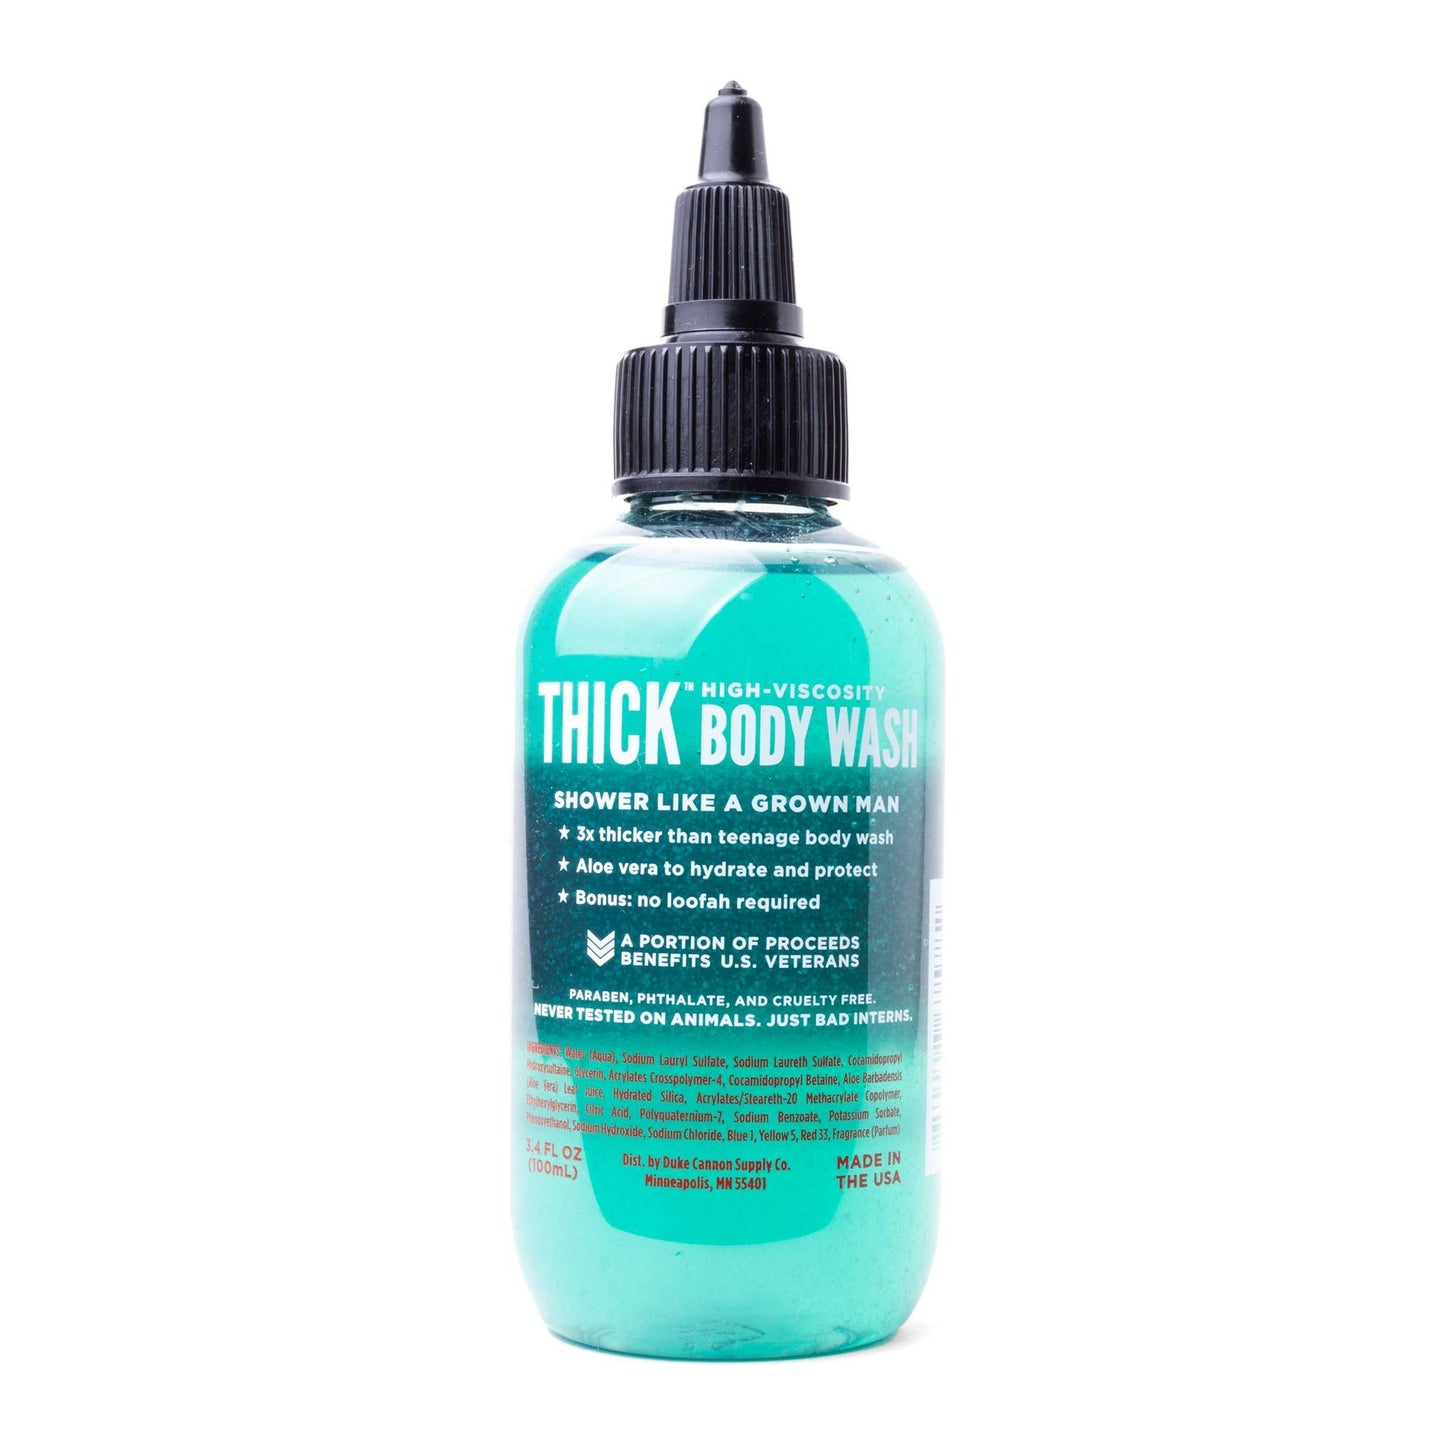 Thick Body Wash Travel Size - Naval Diplomacy Self-Care Duke Cannon   